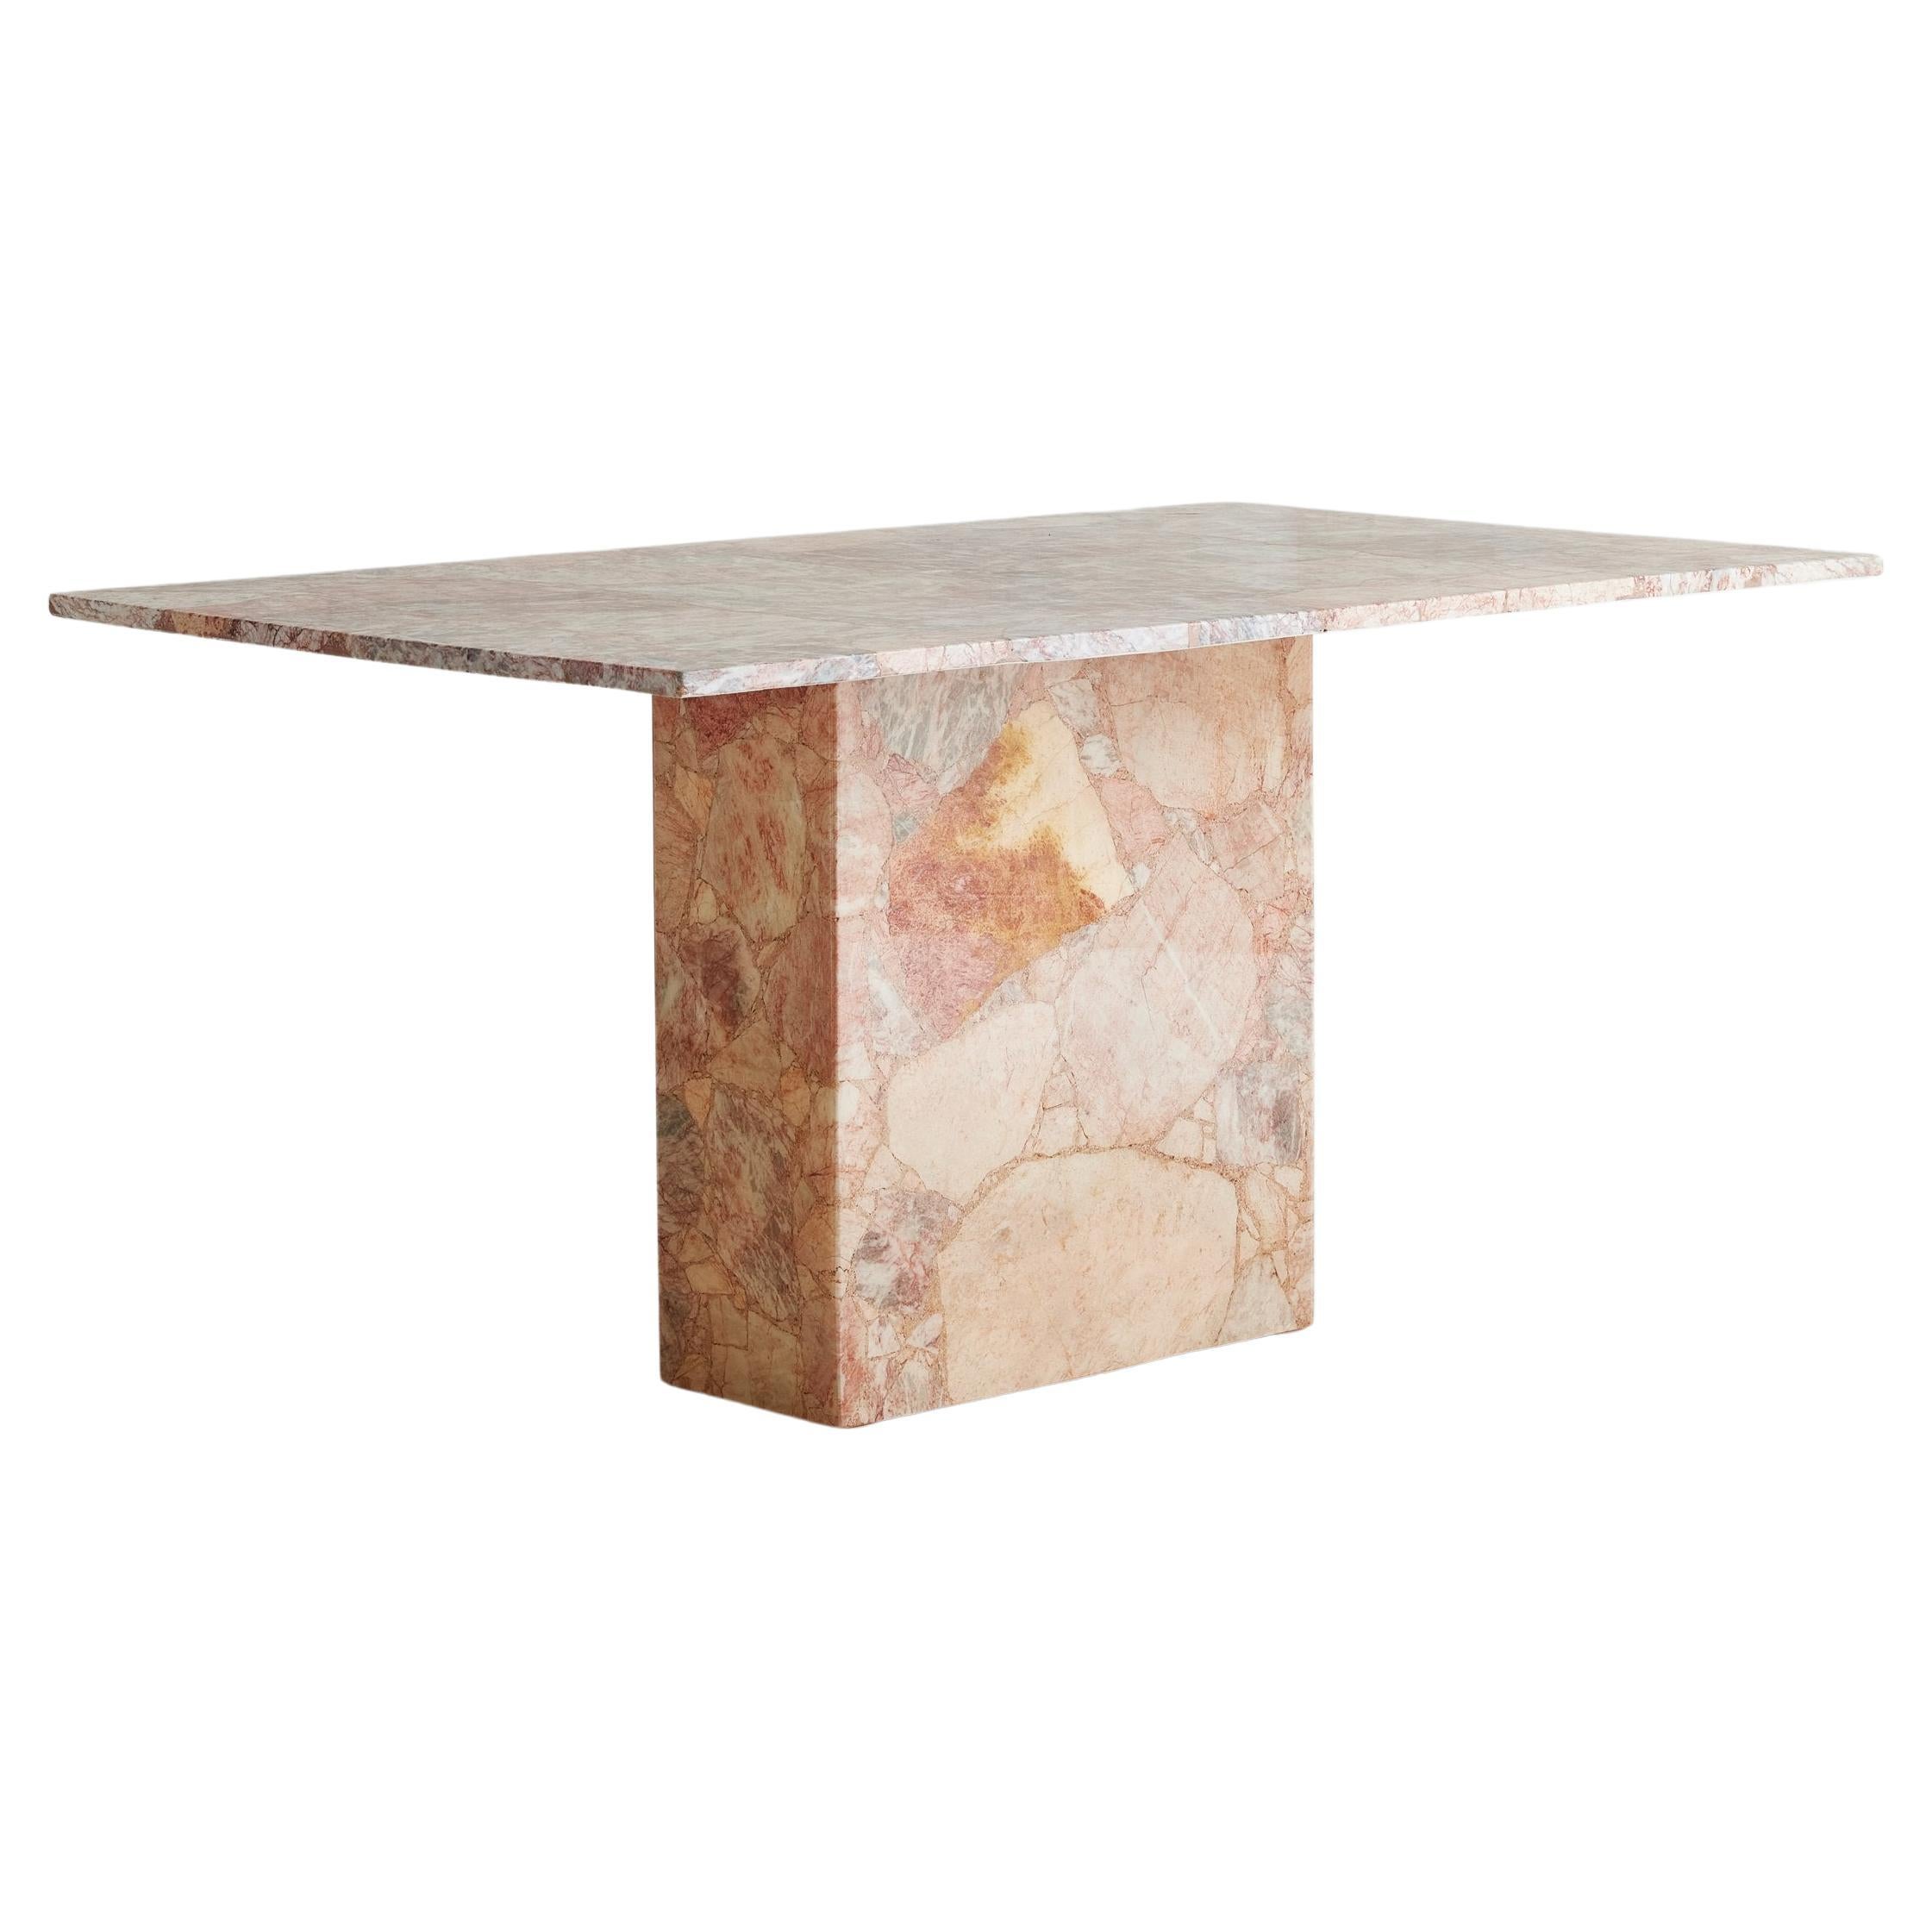 Vintage Pink Terrazzo Style Stone Dining Table or Desk For Sale